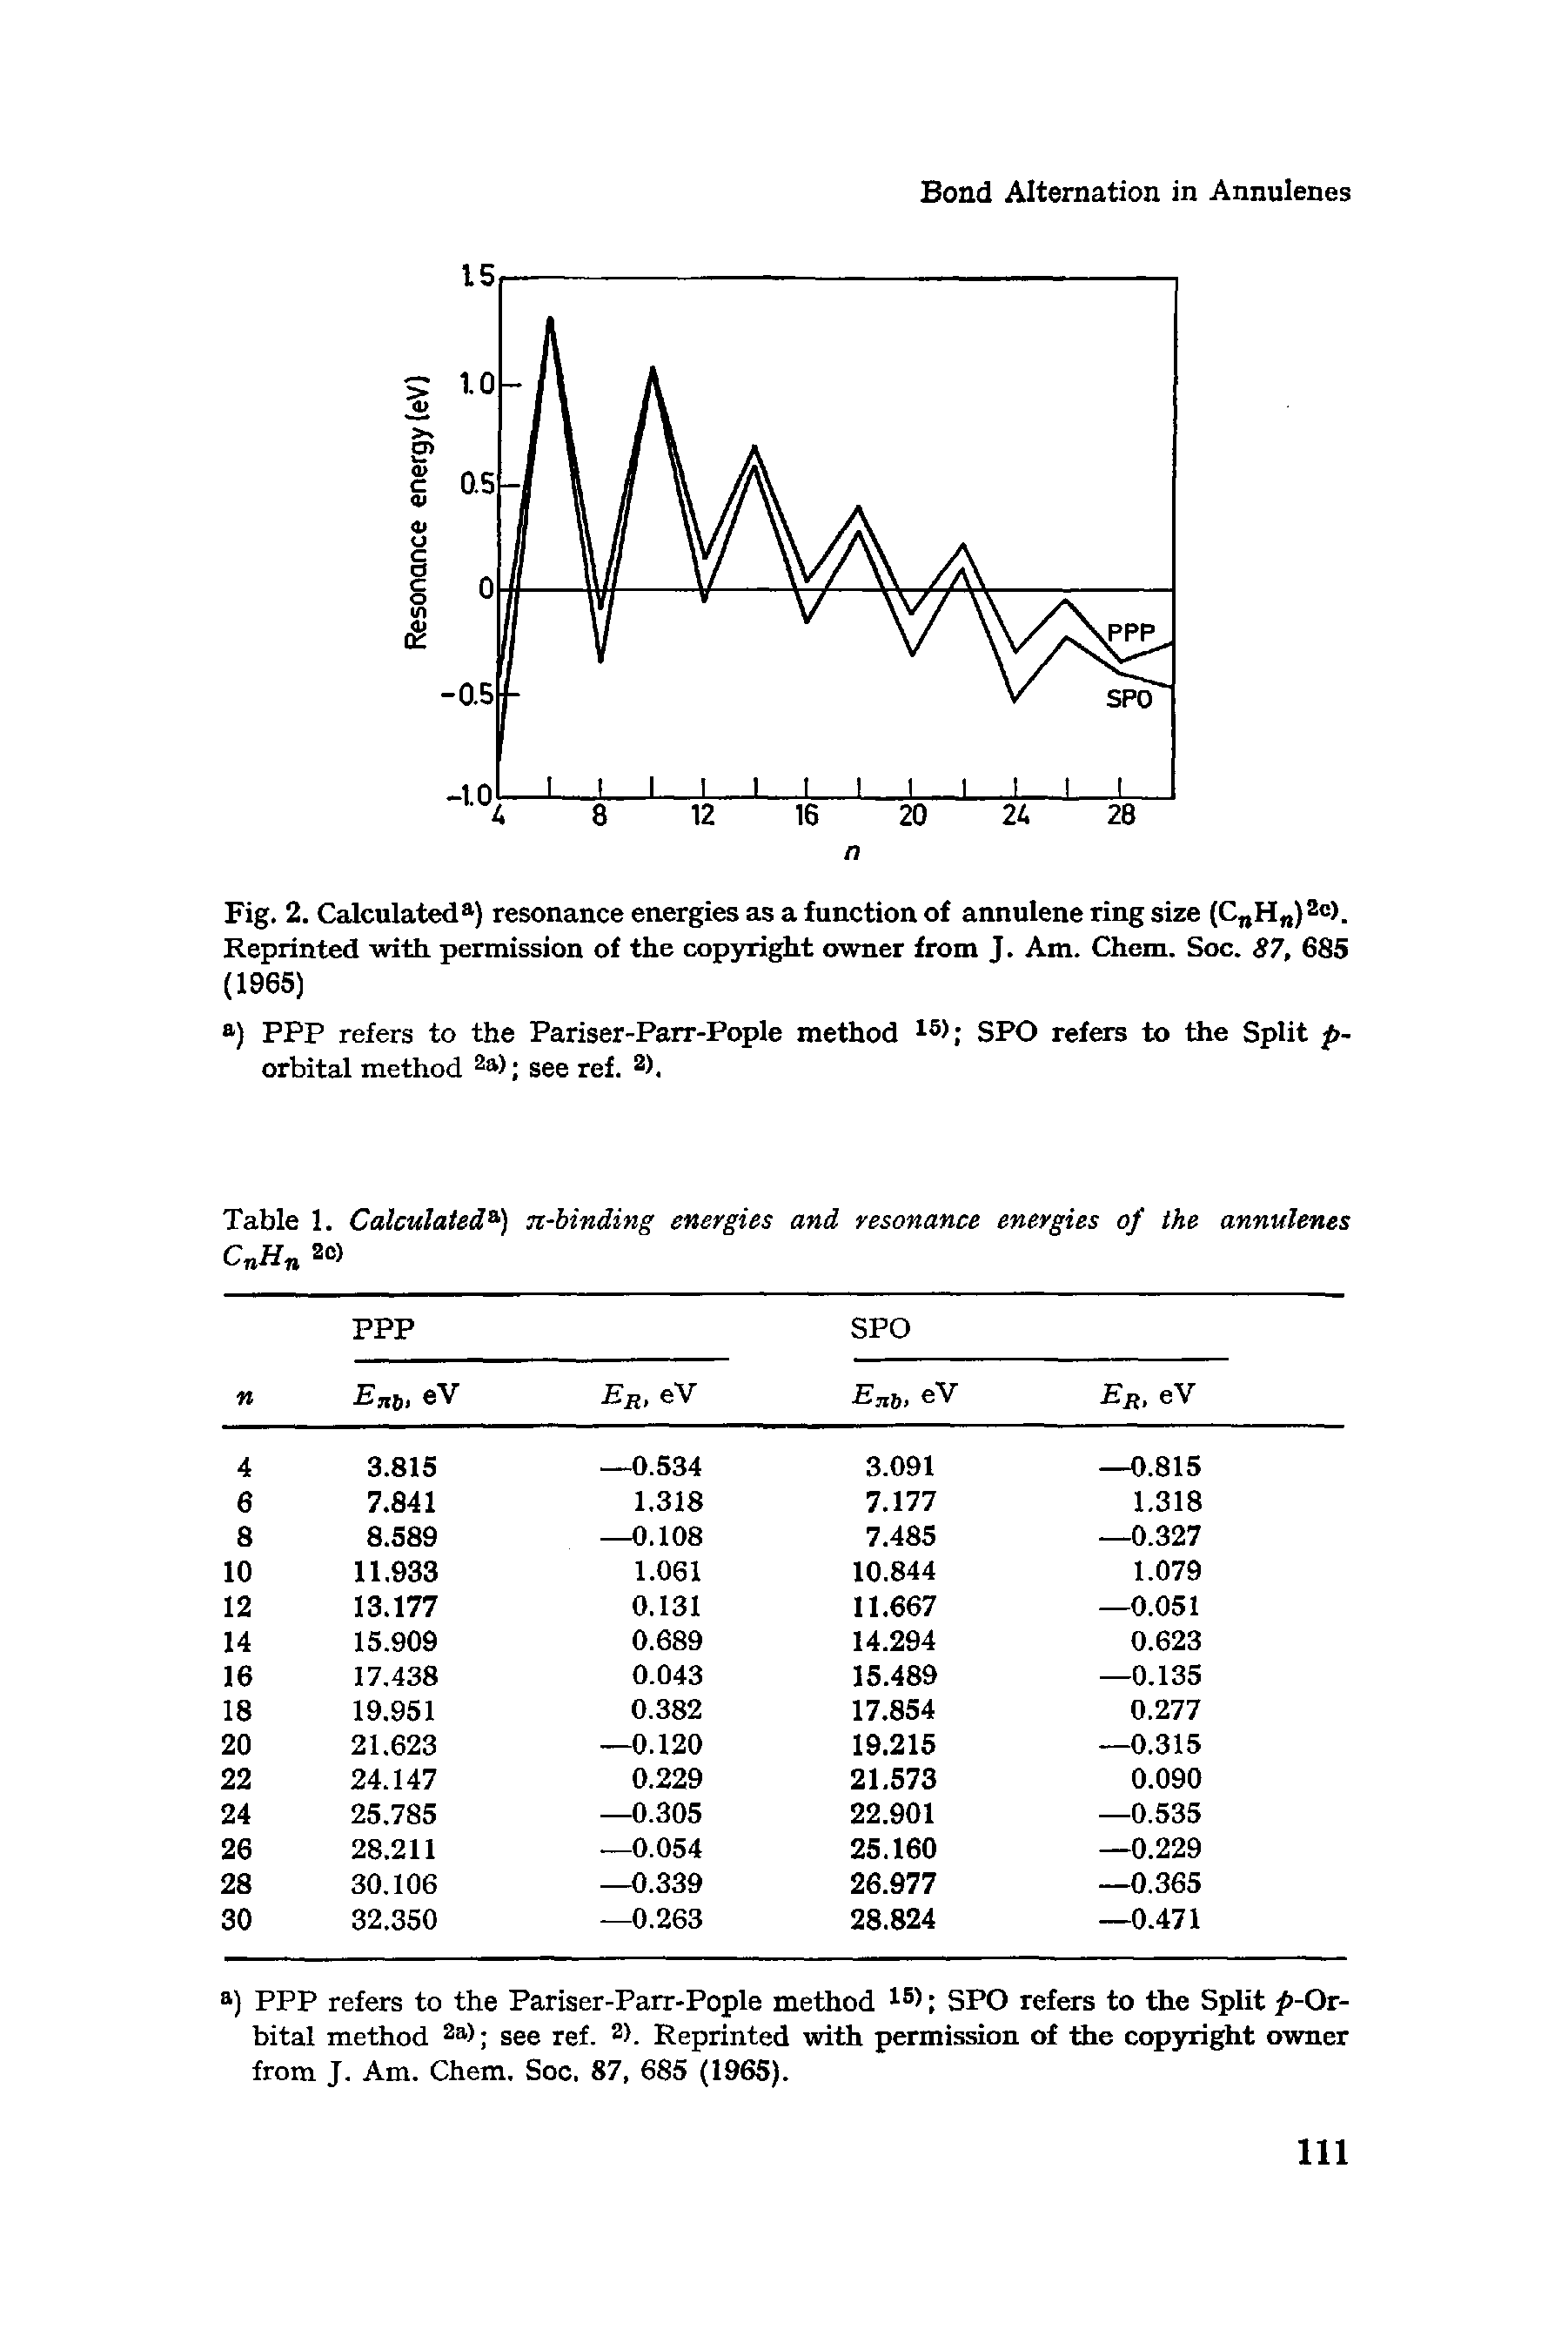 Fig. 2. Calculateda) resonance energies as a function of annulene ring size (CnHn)2c>. Reprinted -with permission of the copyright owner from J. Am. Chem. Soc. 87, 685 (1965)...